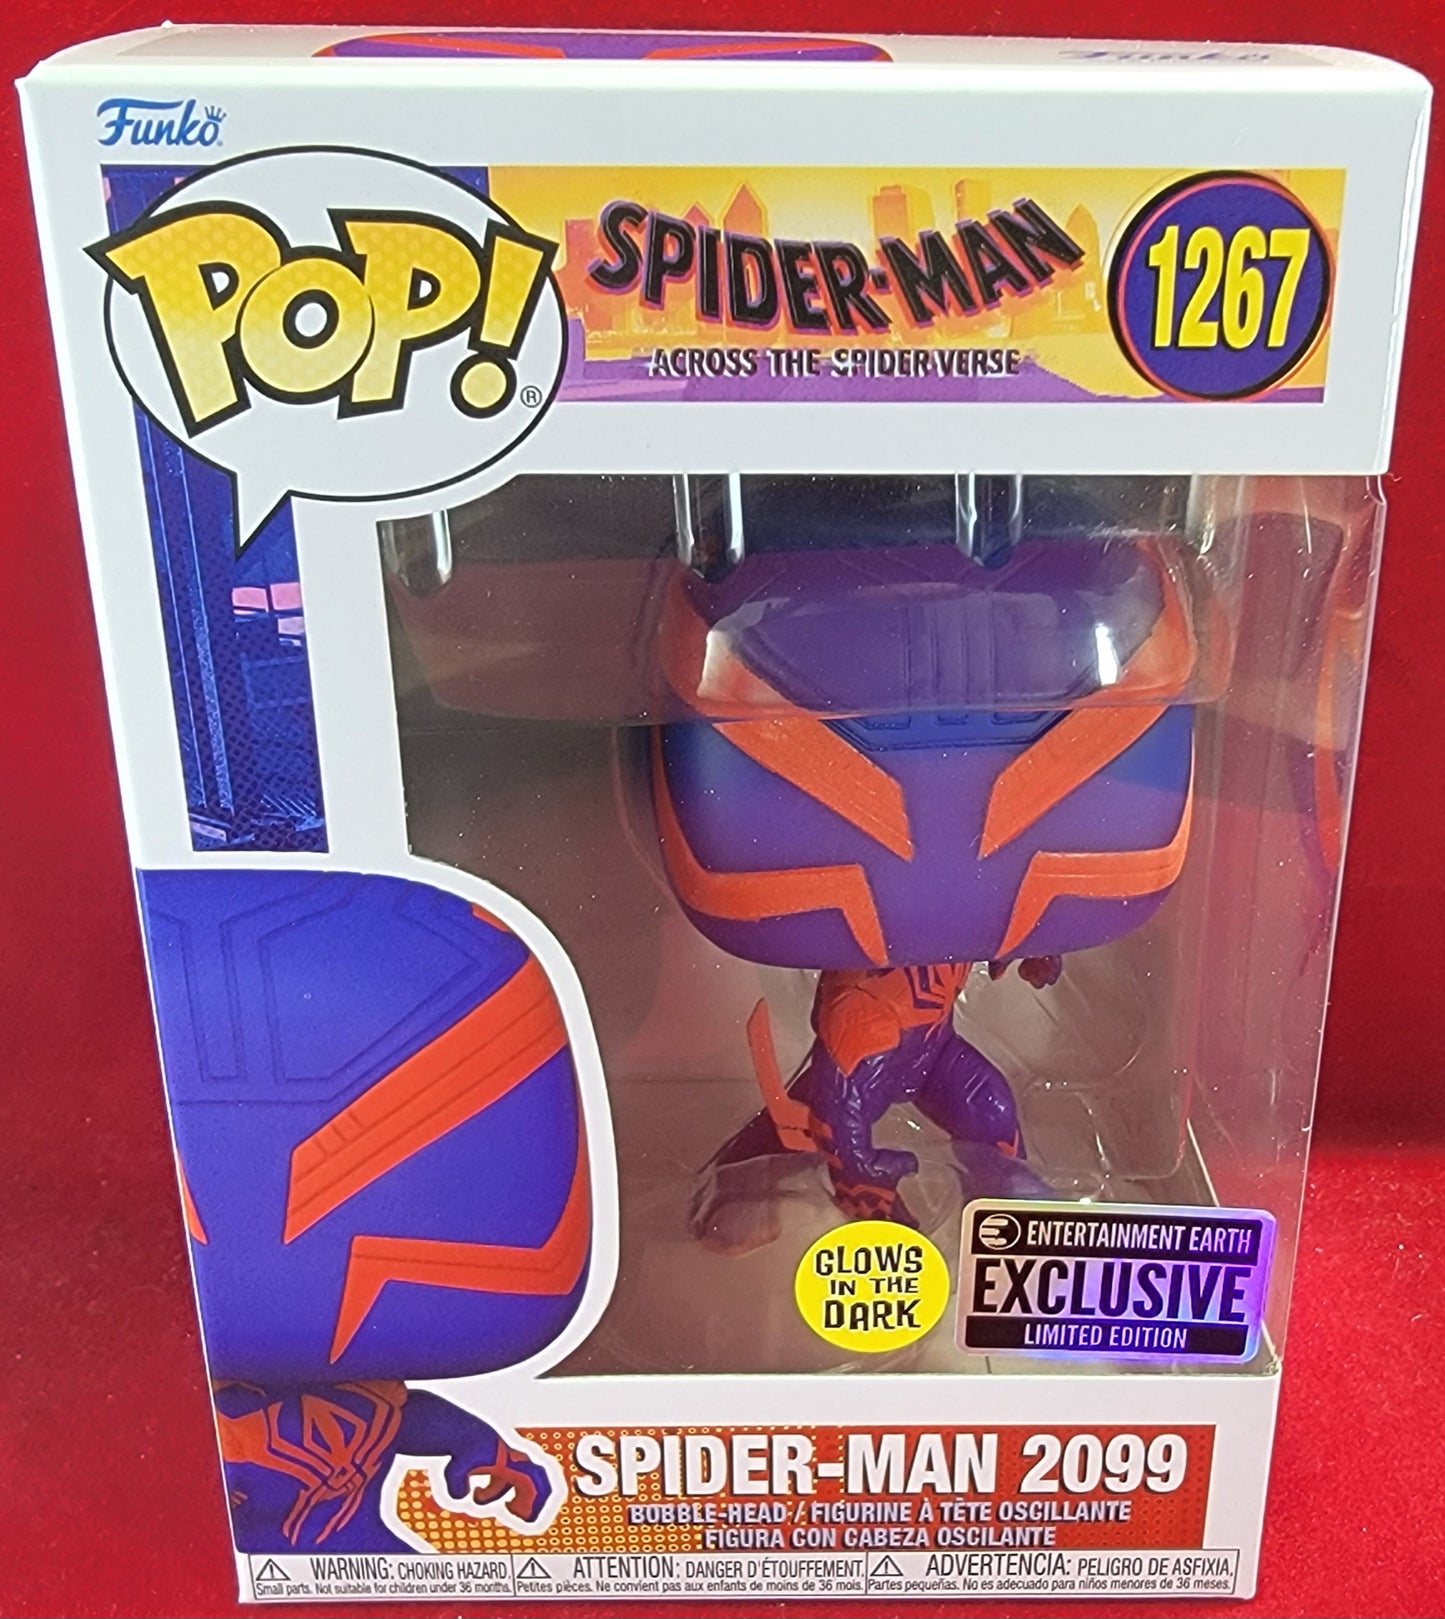 Spider-Man 2099 entertainment earth funko # 1267 (nib)
With pop protector